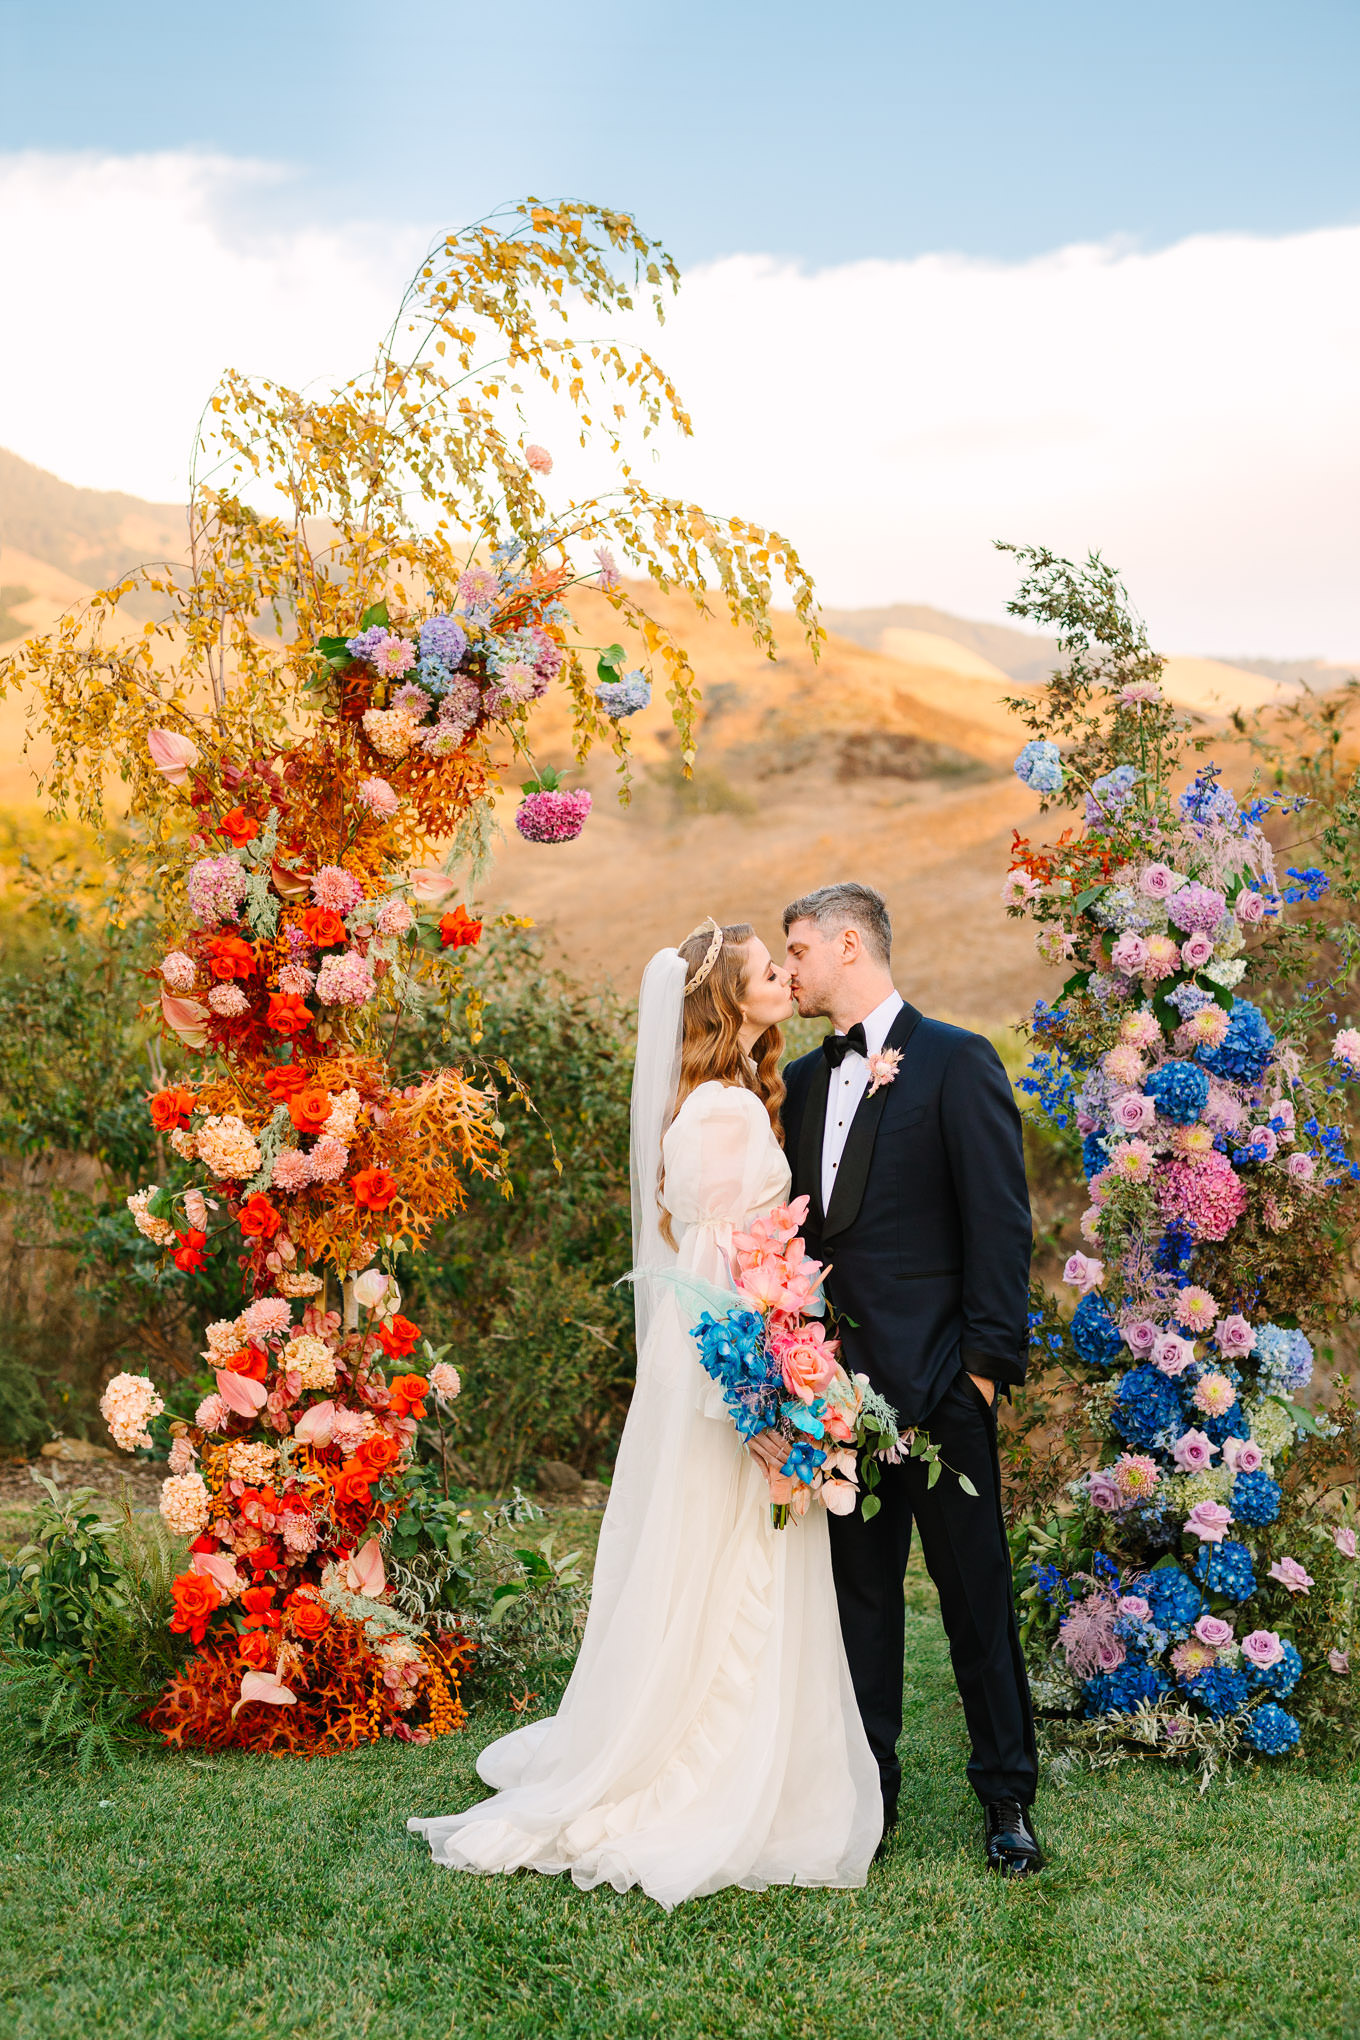 Allison Harvard & Jeremy Burke portraits at floral wedding ceremony installation | Colorful and quirky wedding at Higuera Ranch in San Luis Obispo | #sanluisobispowedding #californiawedding #higueraranch #madonnainn   Source: Mary Costa Photography | Los Angeles